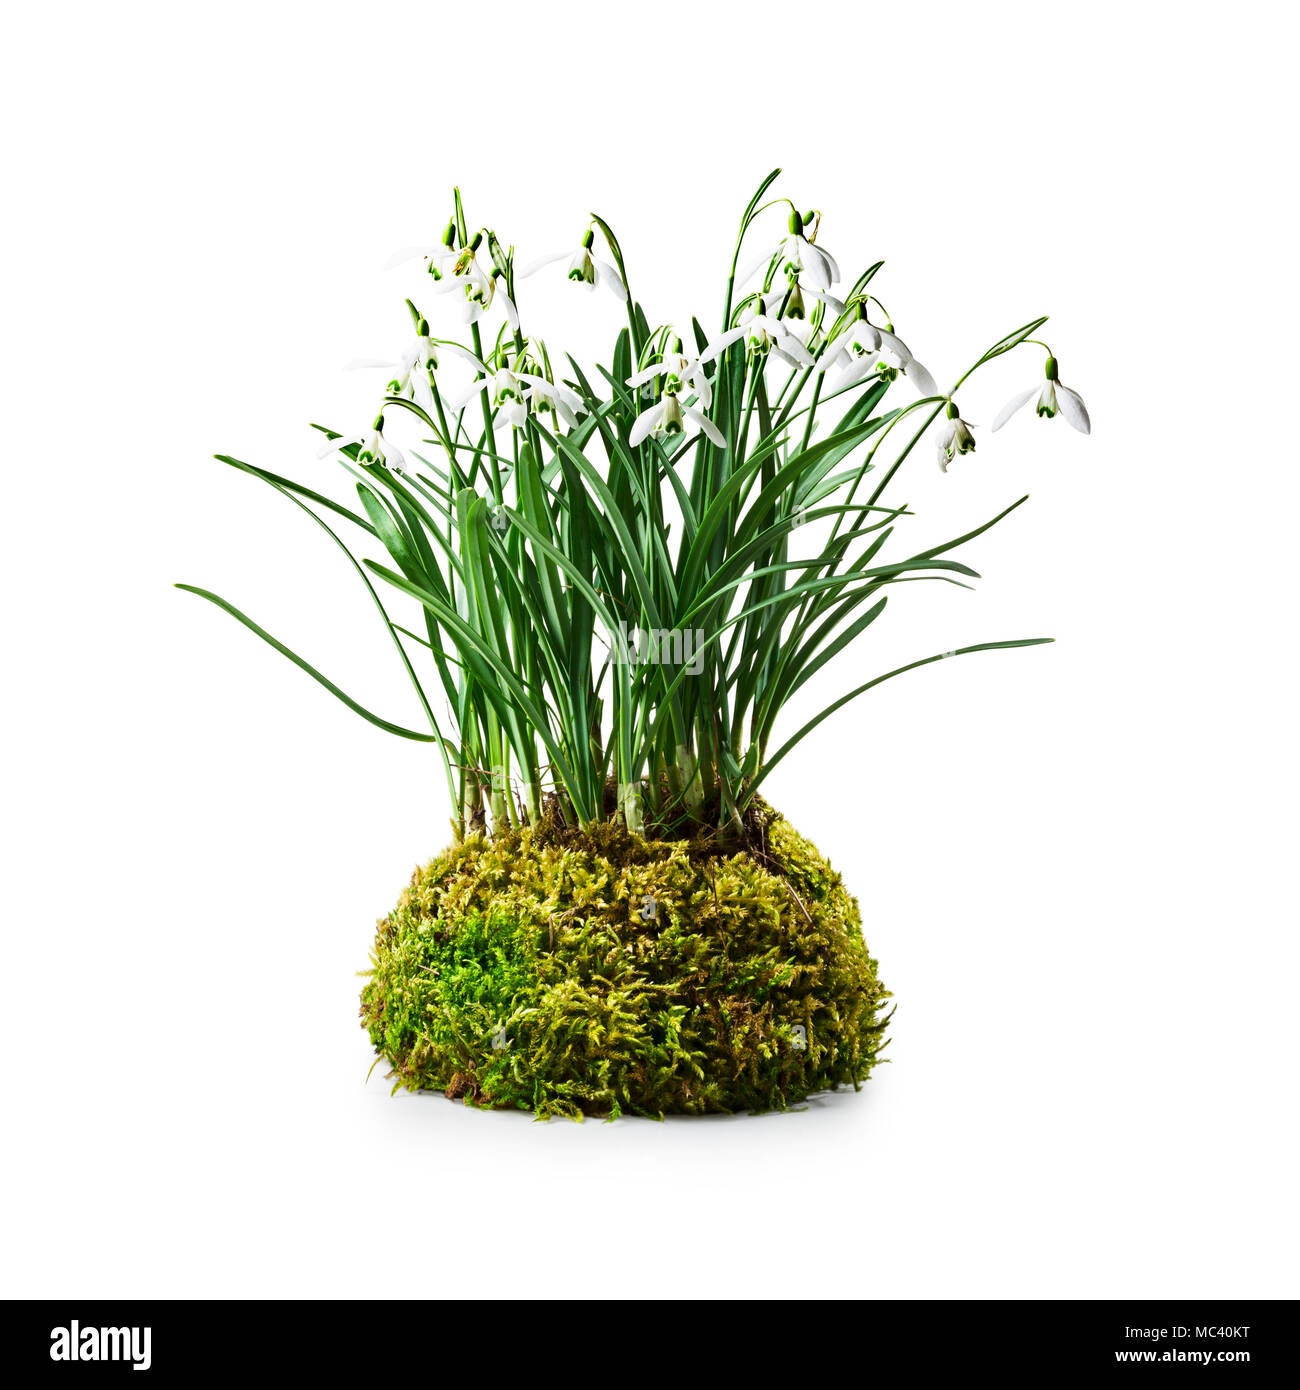 Snowdrop spring flowers. Floral arrangement with snowdrops and moss isolated on white background clipping path included. Design element Stock Photo